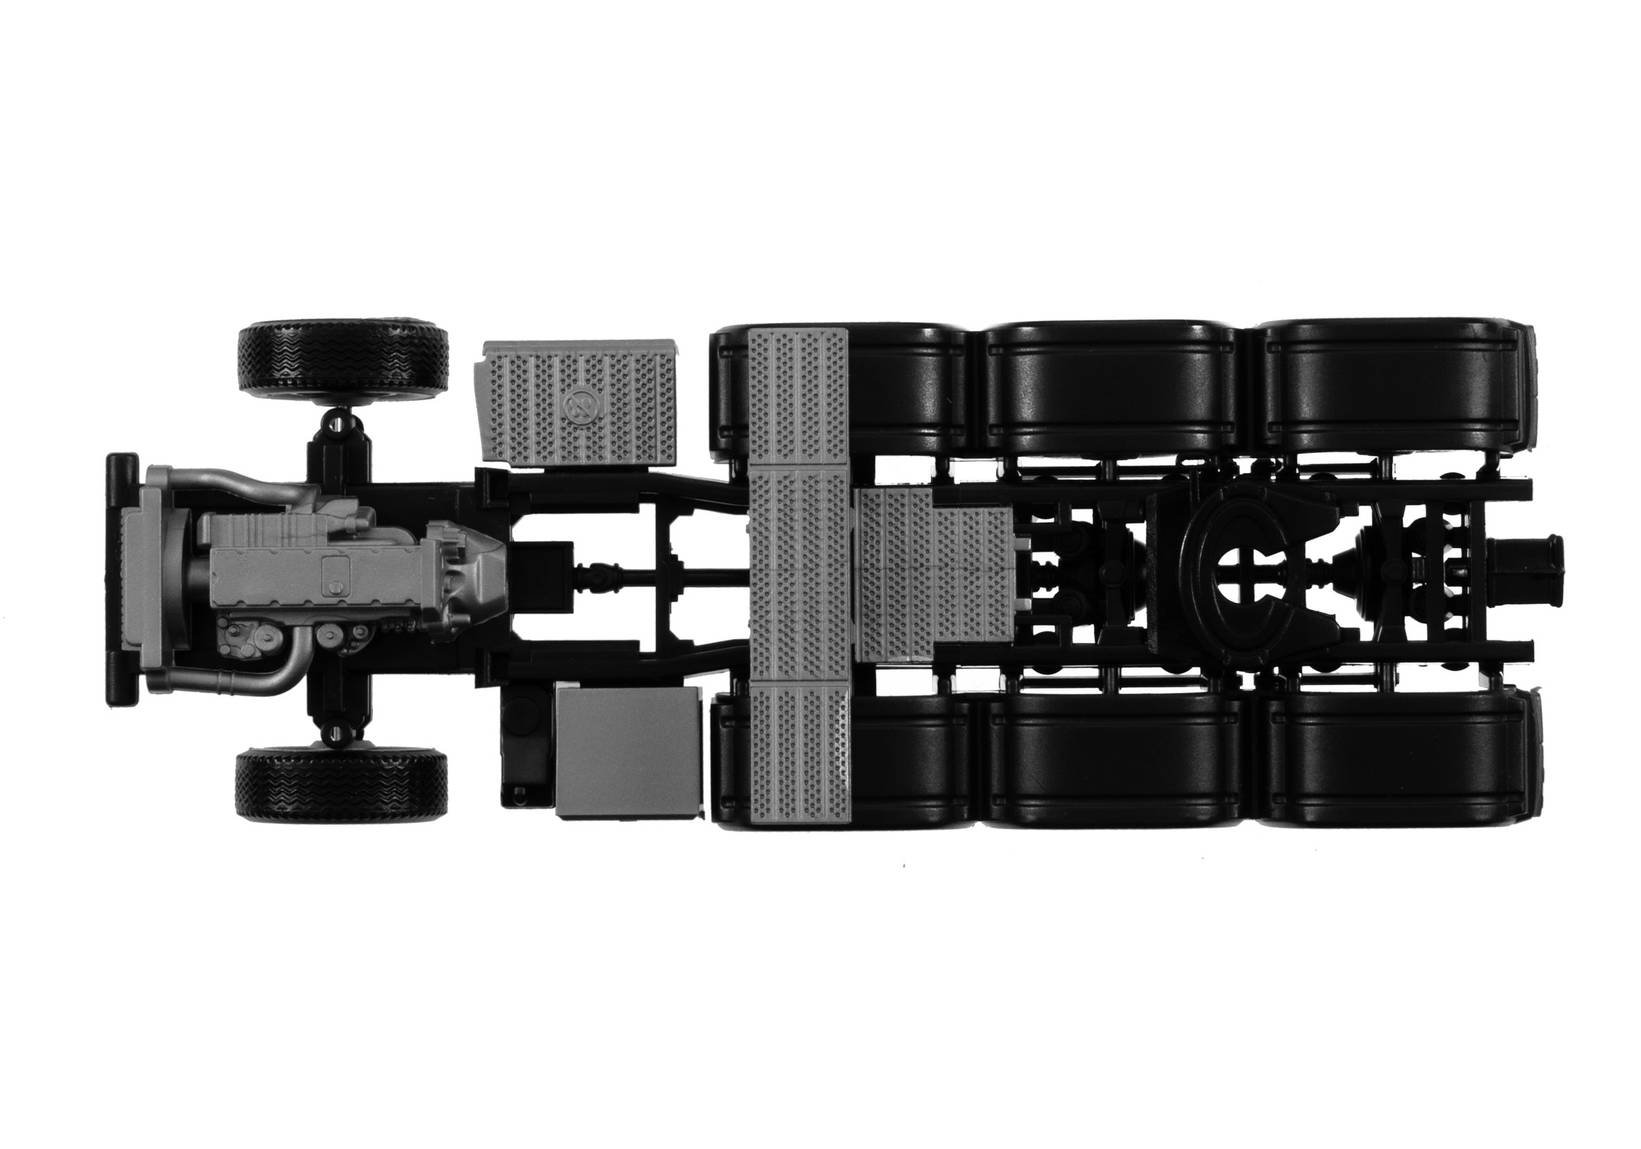 Chassis for Mercedes-Benz Actros SLT 4-axle heavy duty rigid tractor Content: 2 pcs.